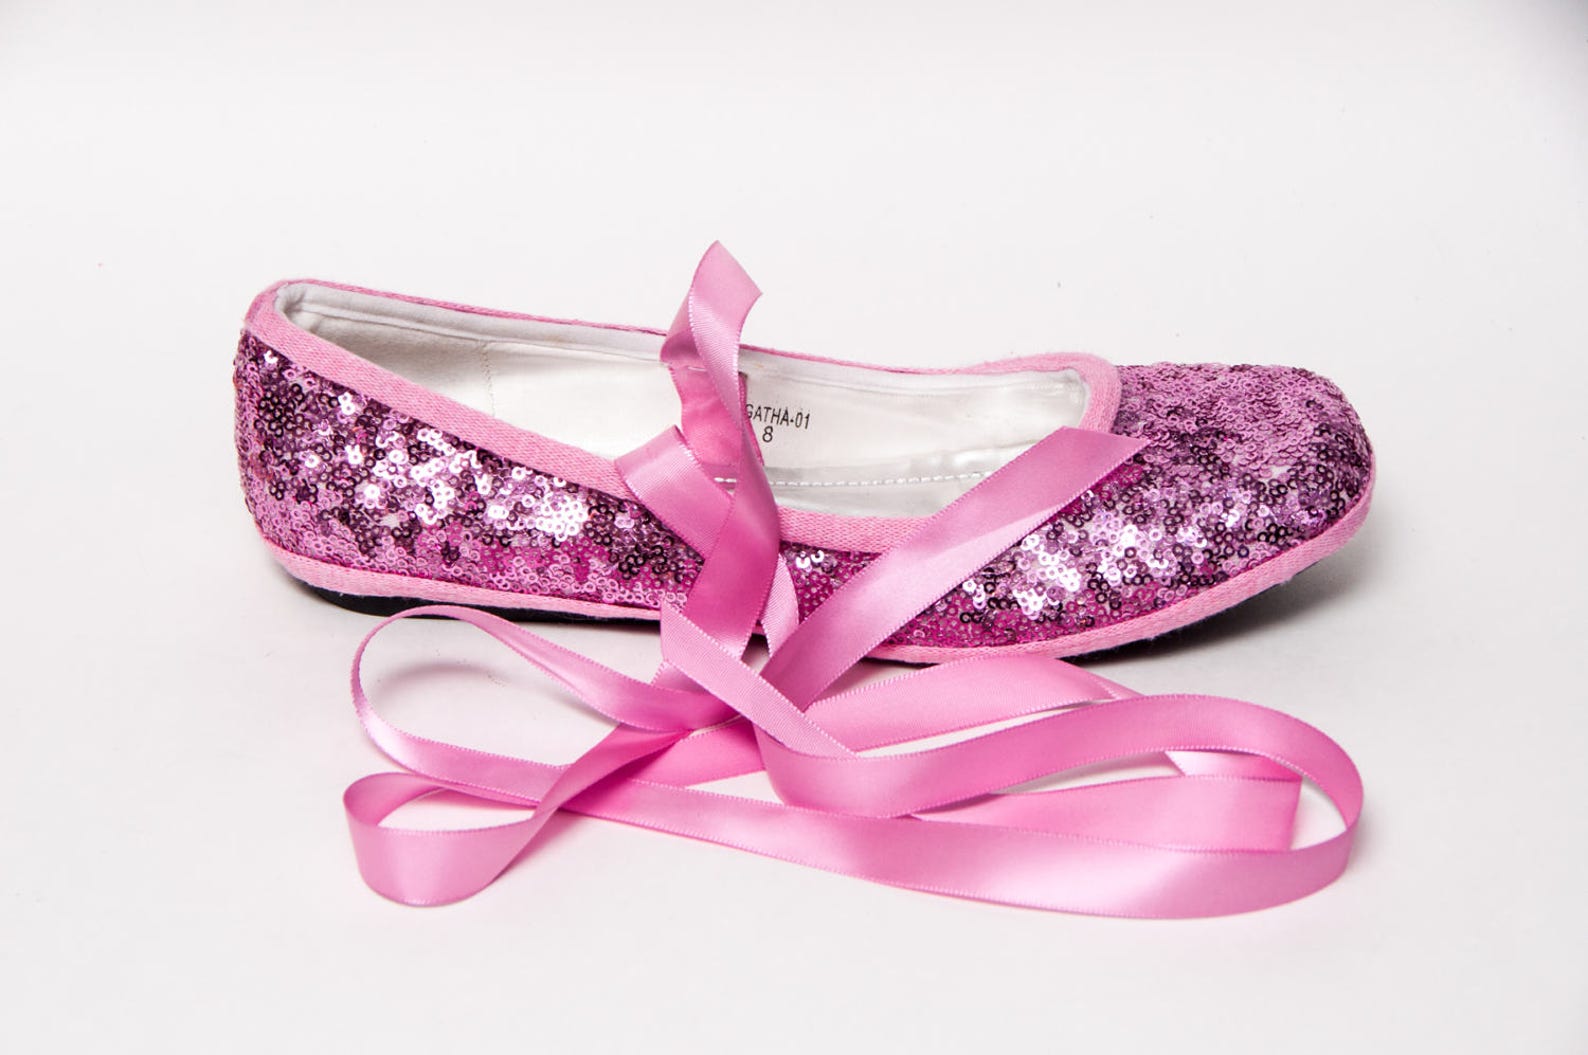 tiny sequin - blush pink ballet flats slippers shoes with matching ribbons